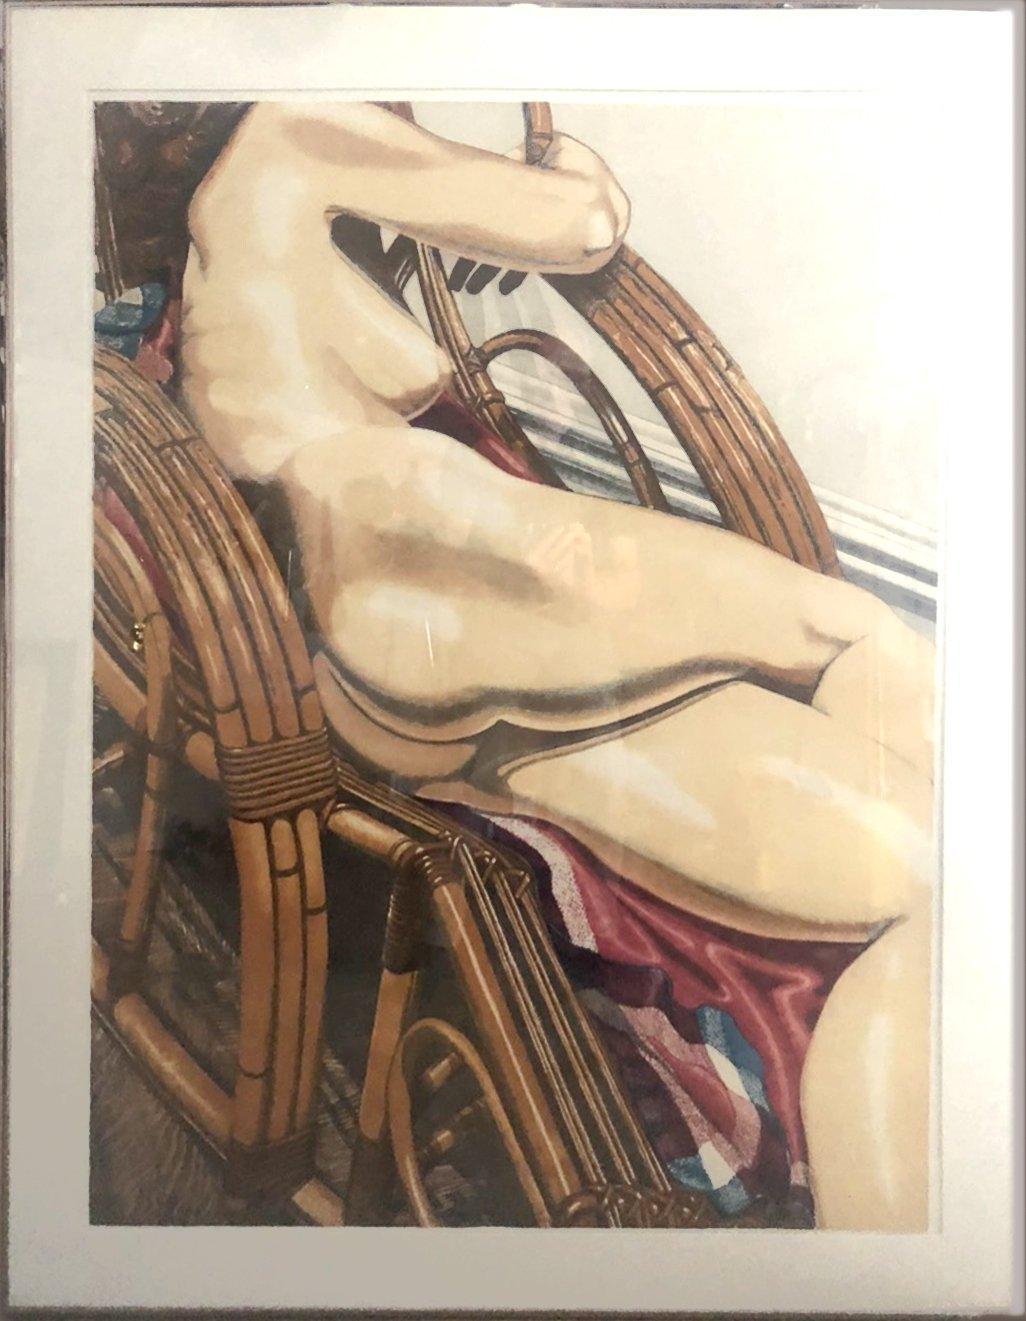 Reclining Nude on Bamboo Chair Aquatint | Philip Pearlstein,{{product.type}}